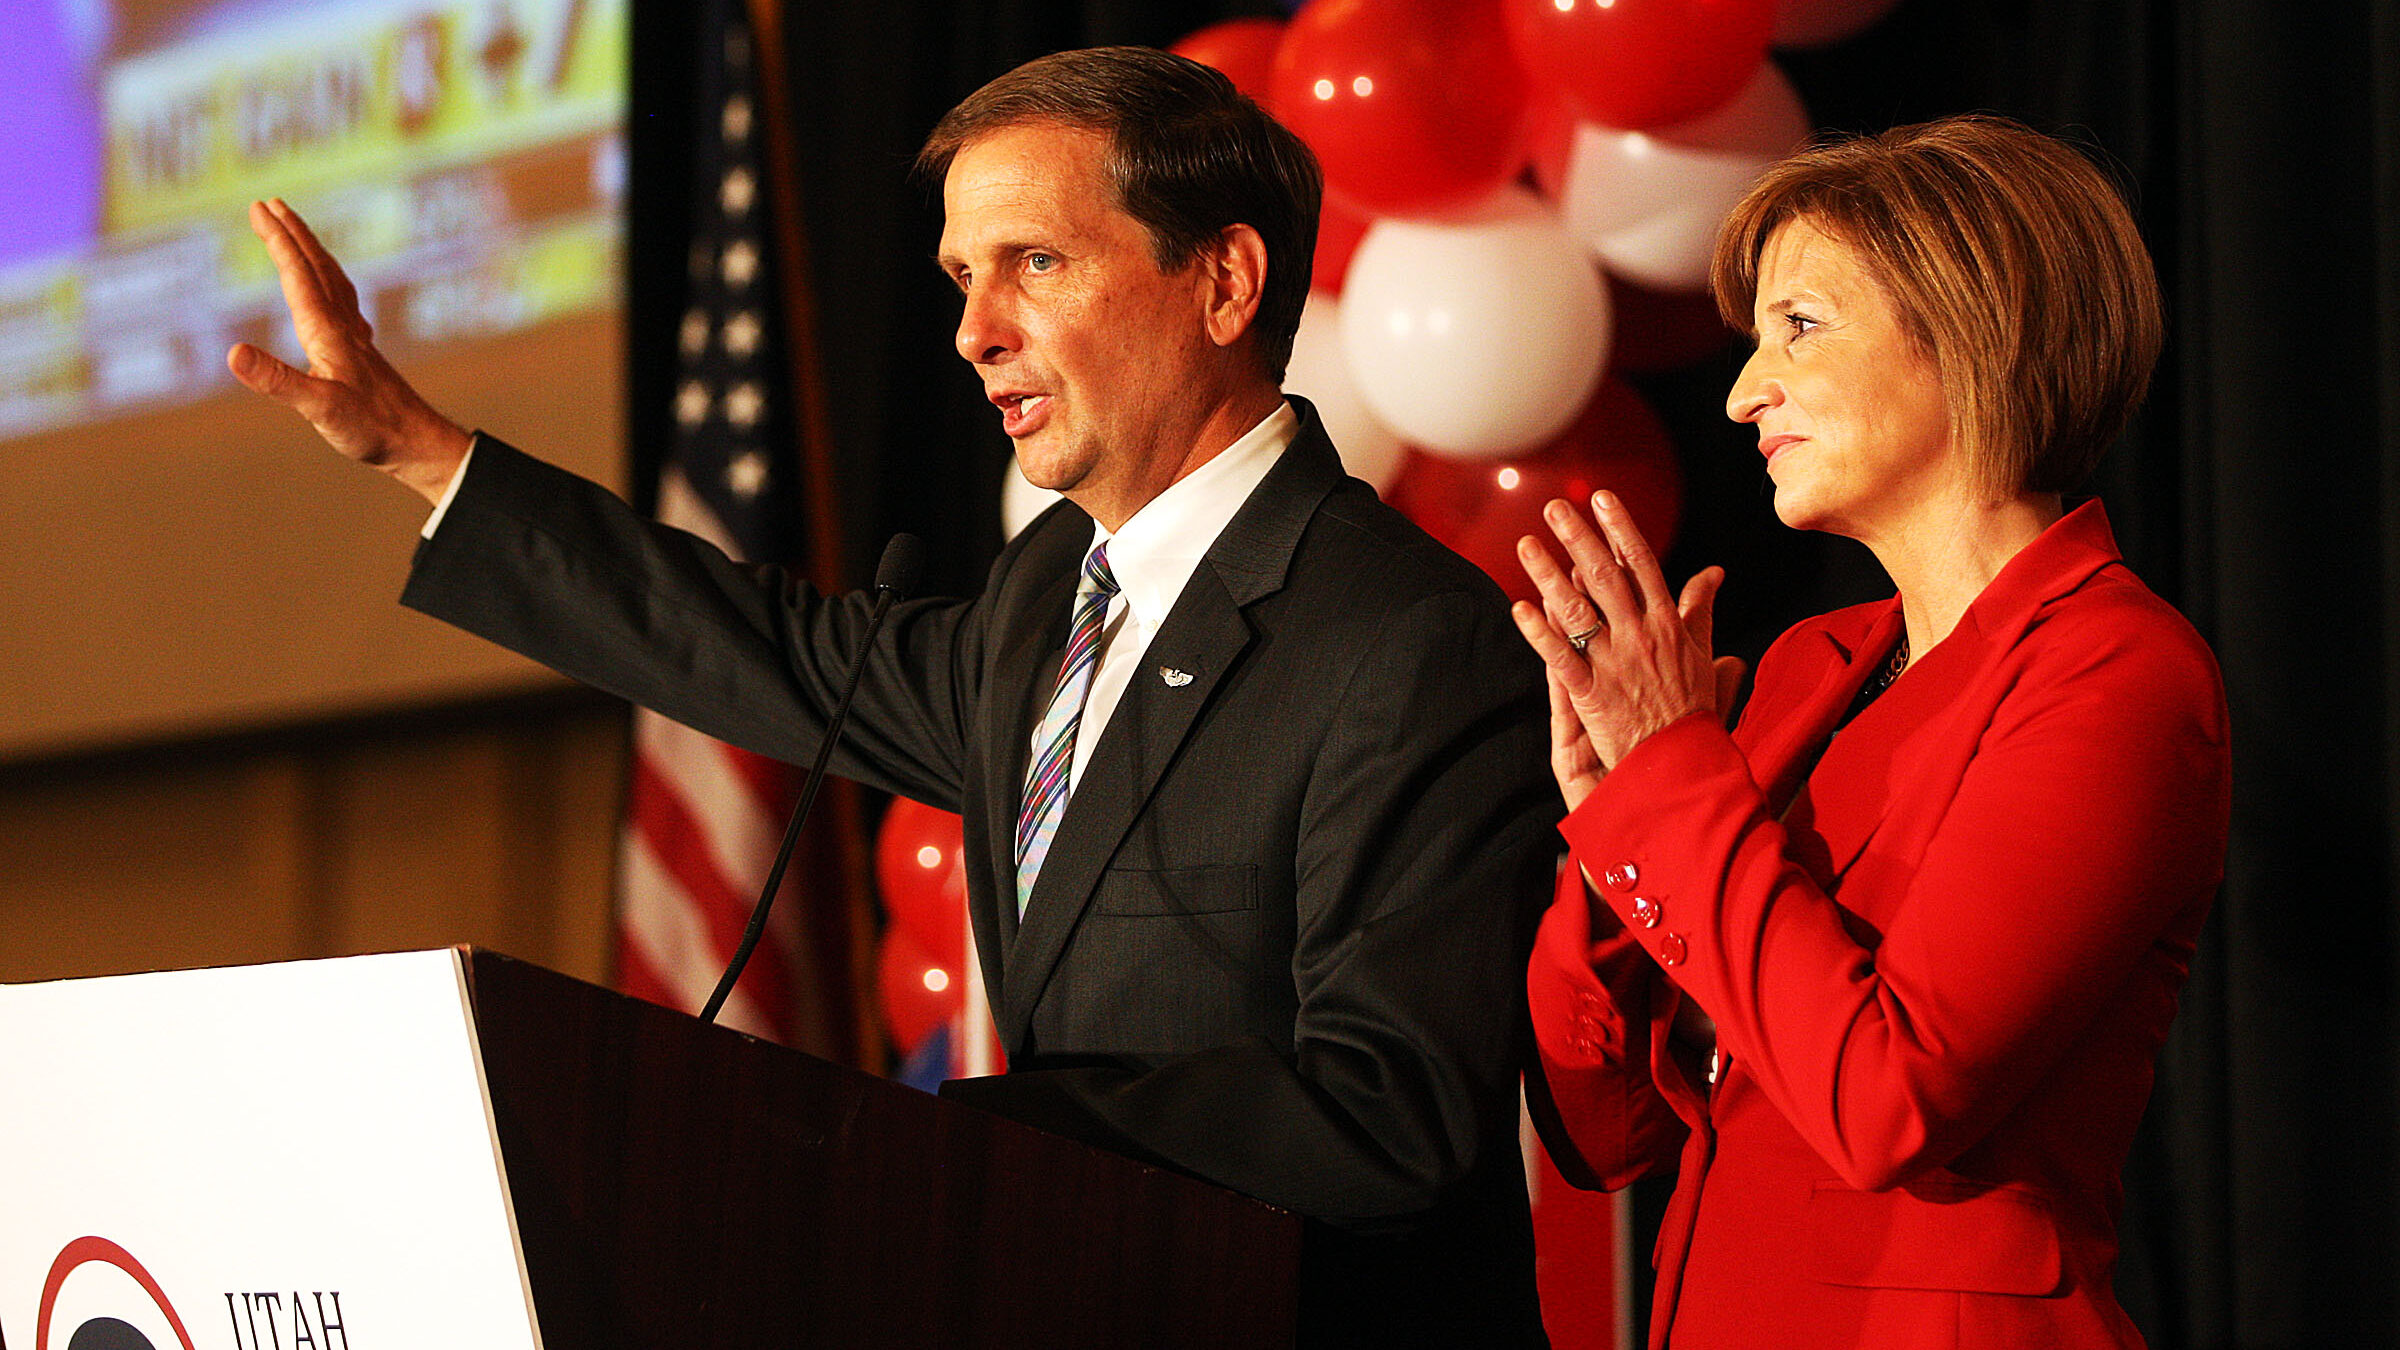 Utah Congressman Chris Stewart confirmed on Wednesday that he will resign from the U.S. House of Re...